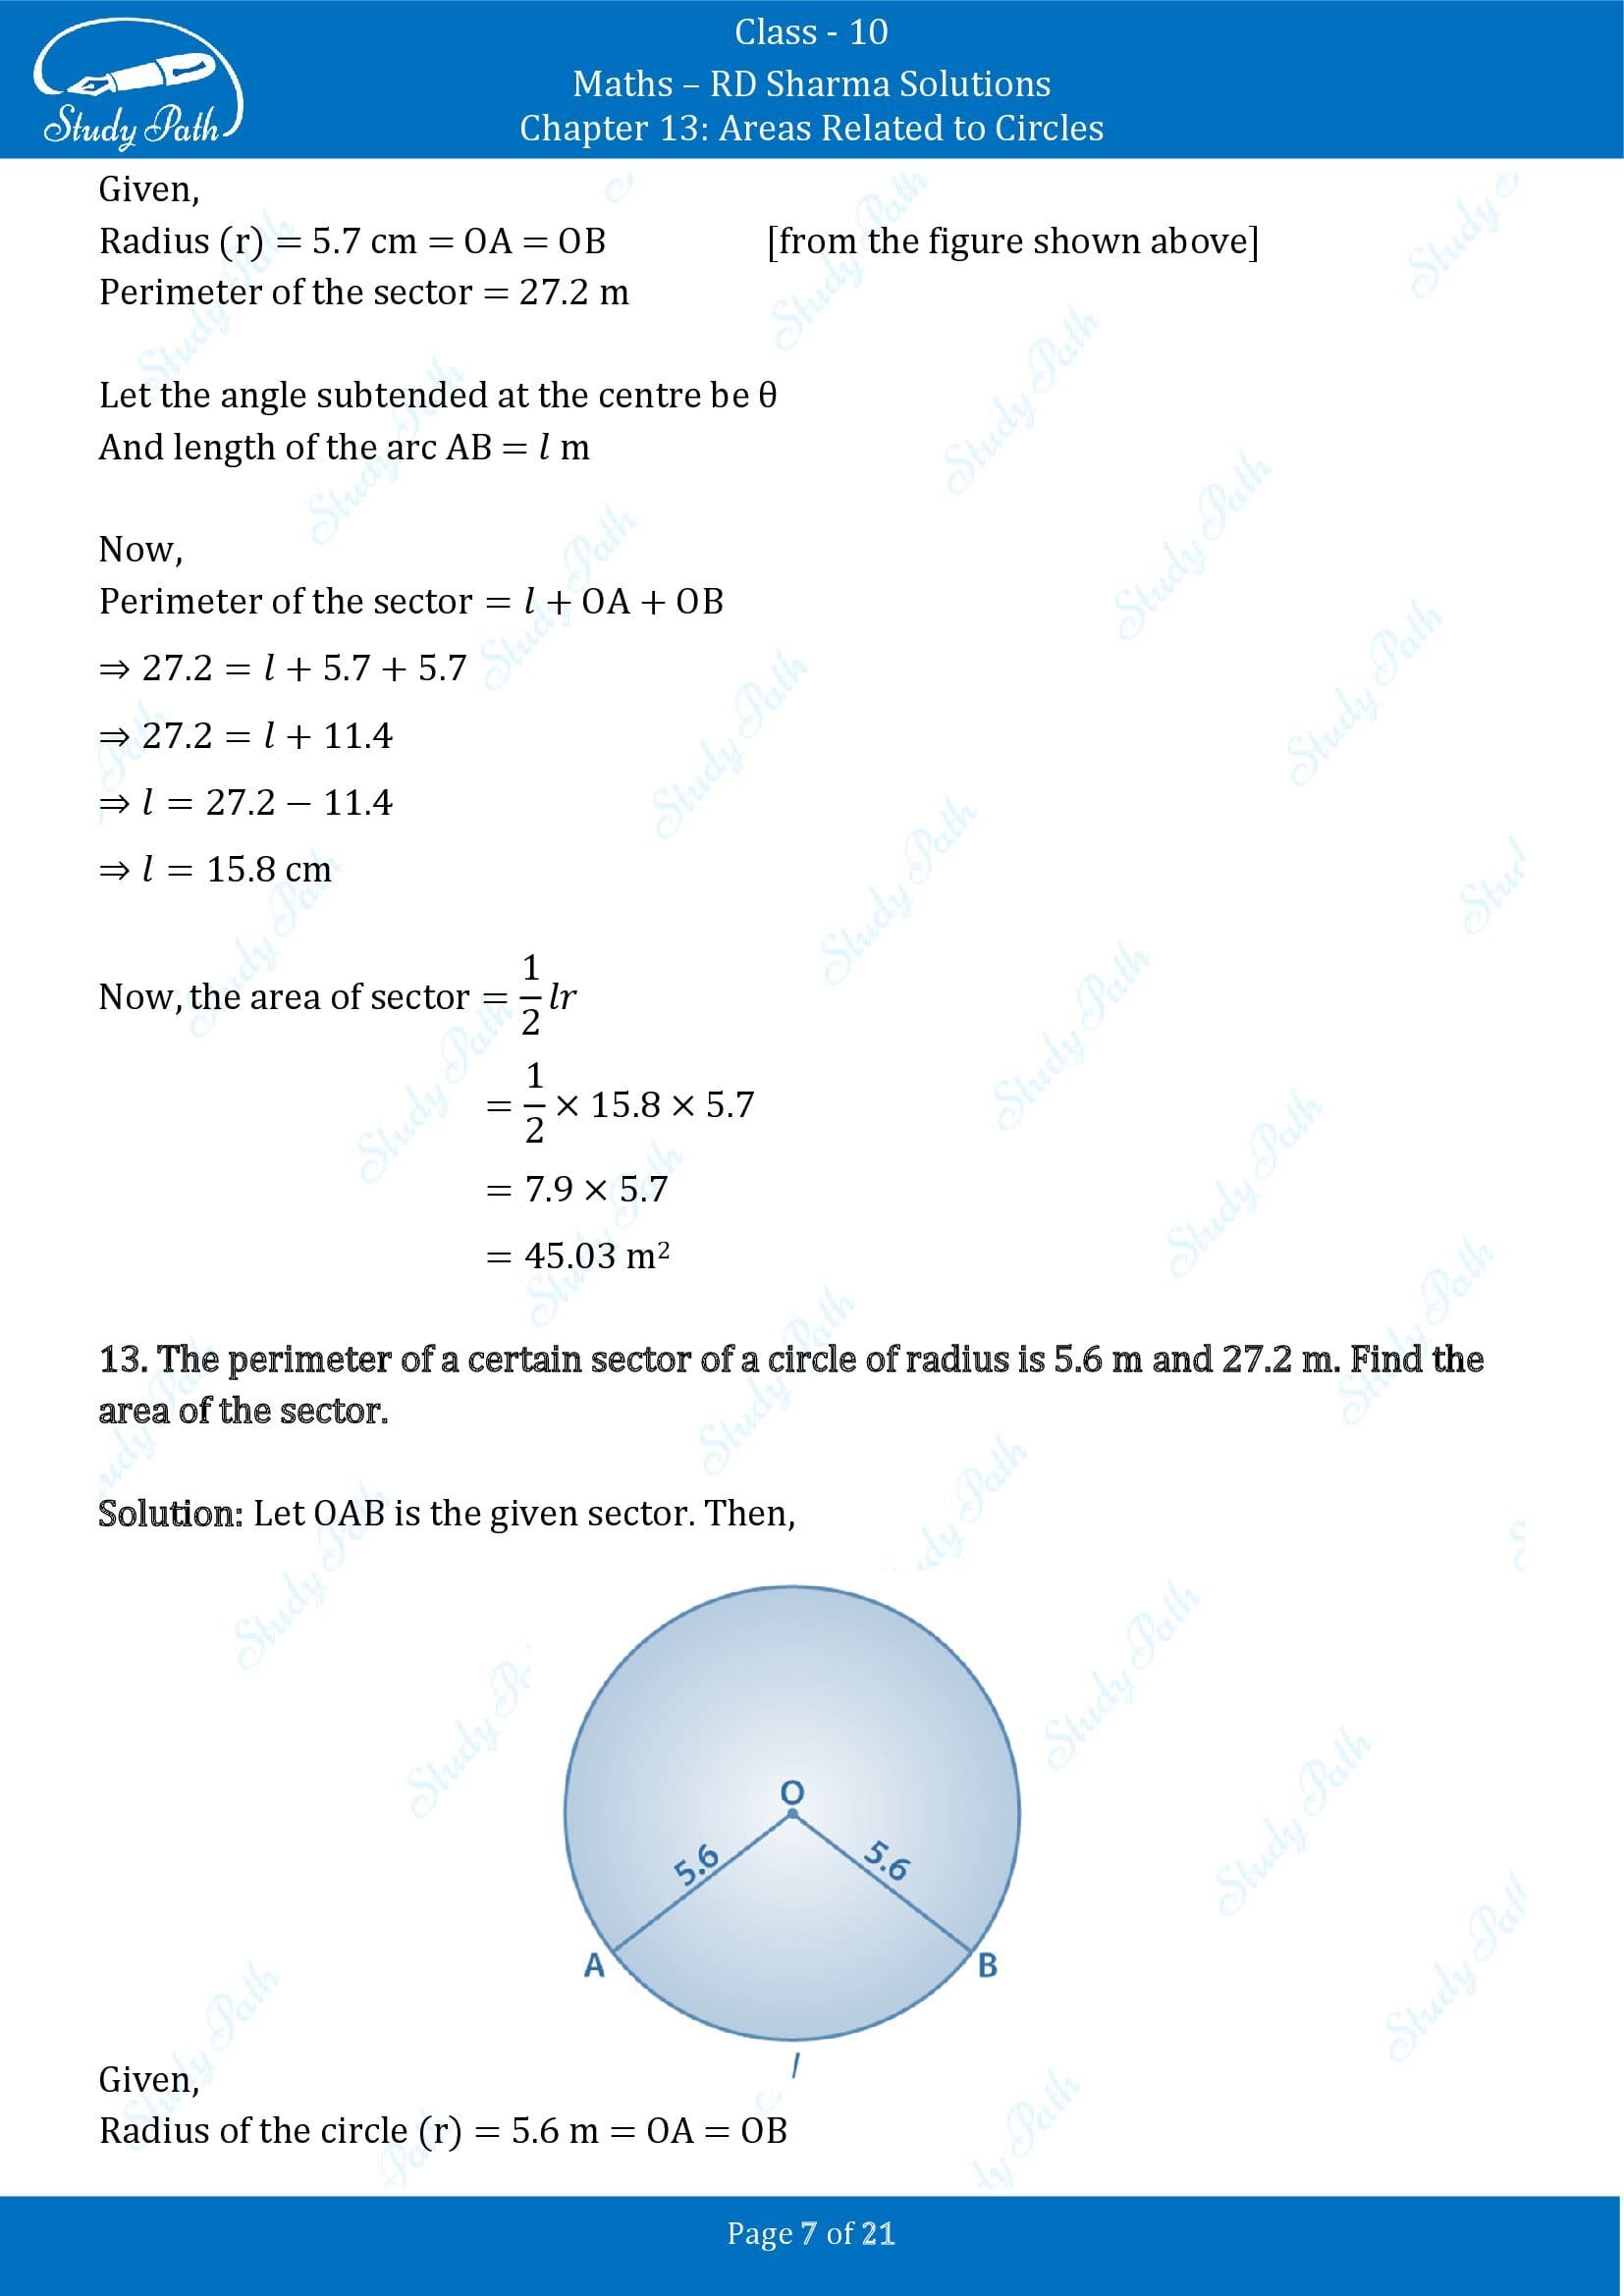 RD Sharma Solutions Class 10 Chapter 13 Areas Related to Circles Exercise 13.2 00007